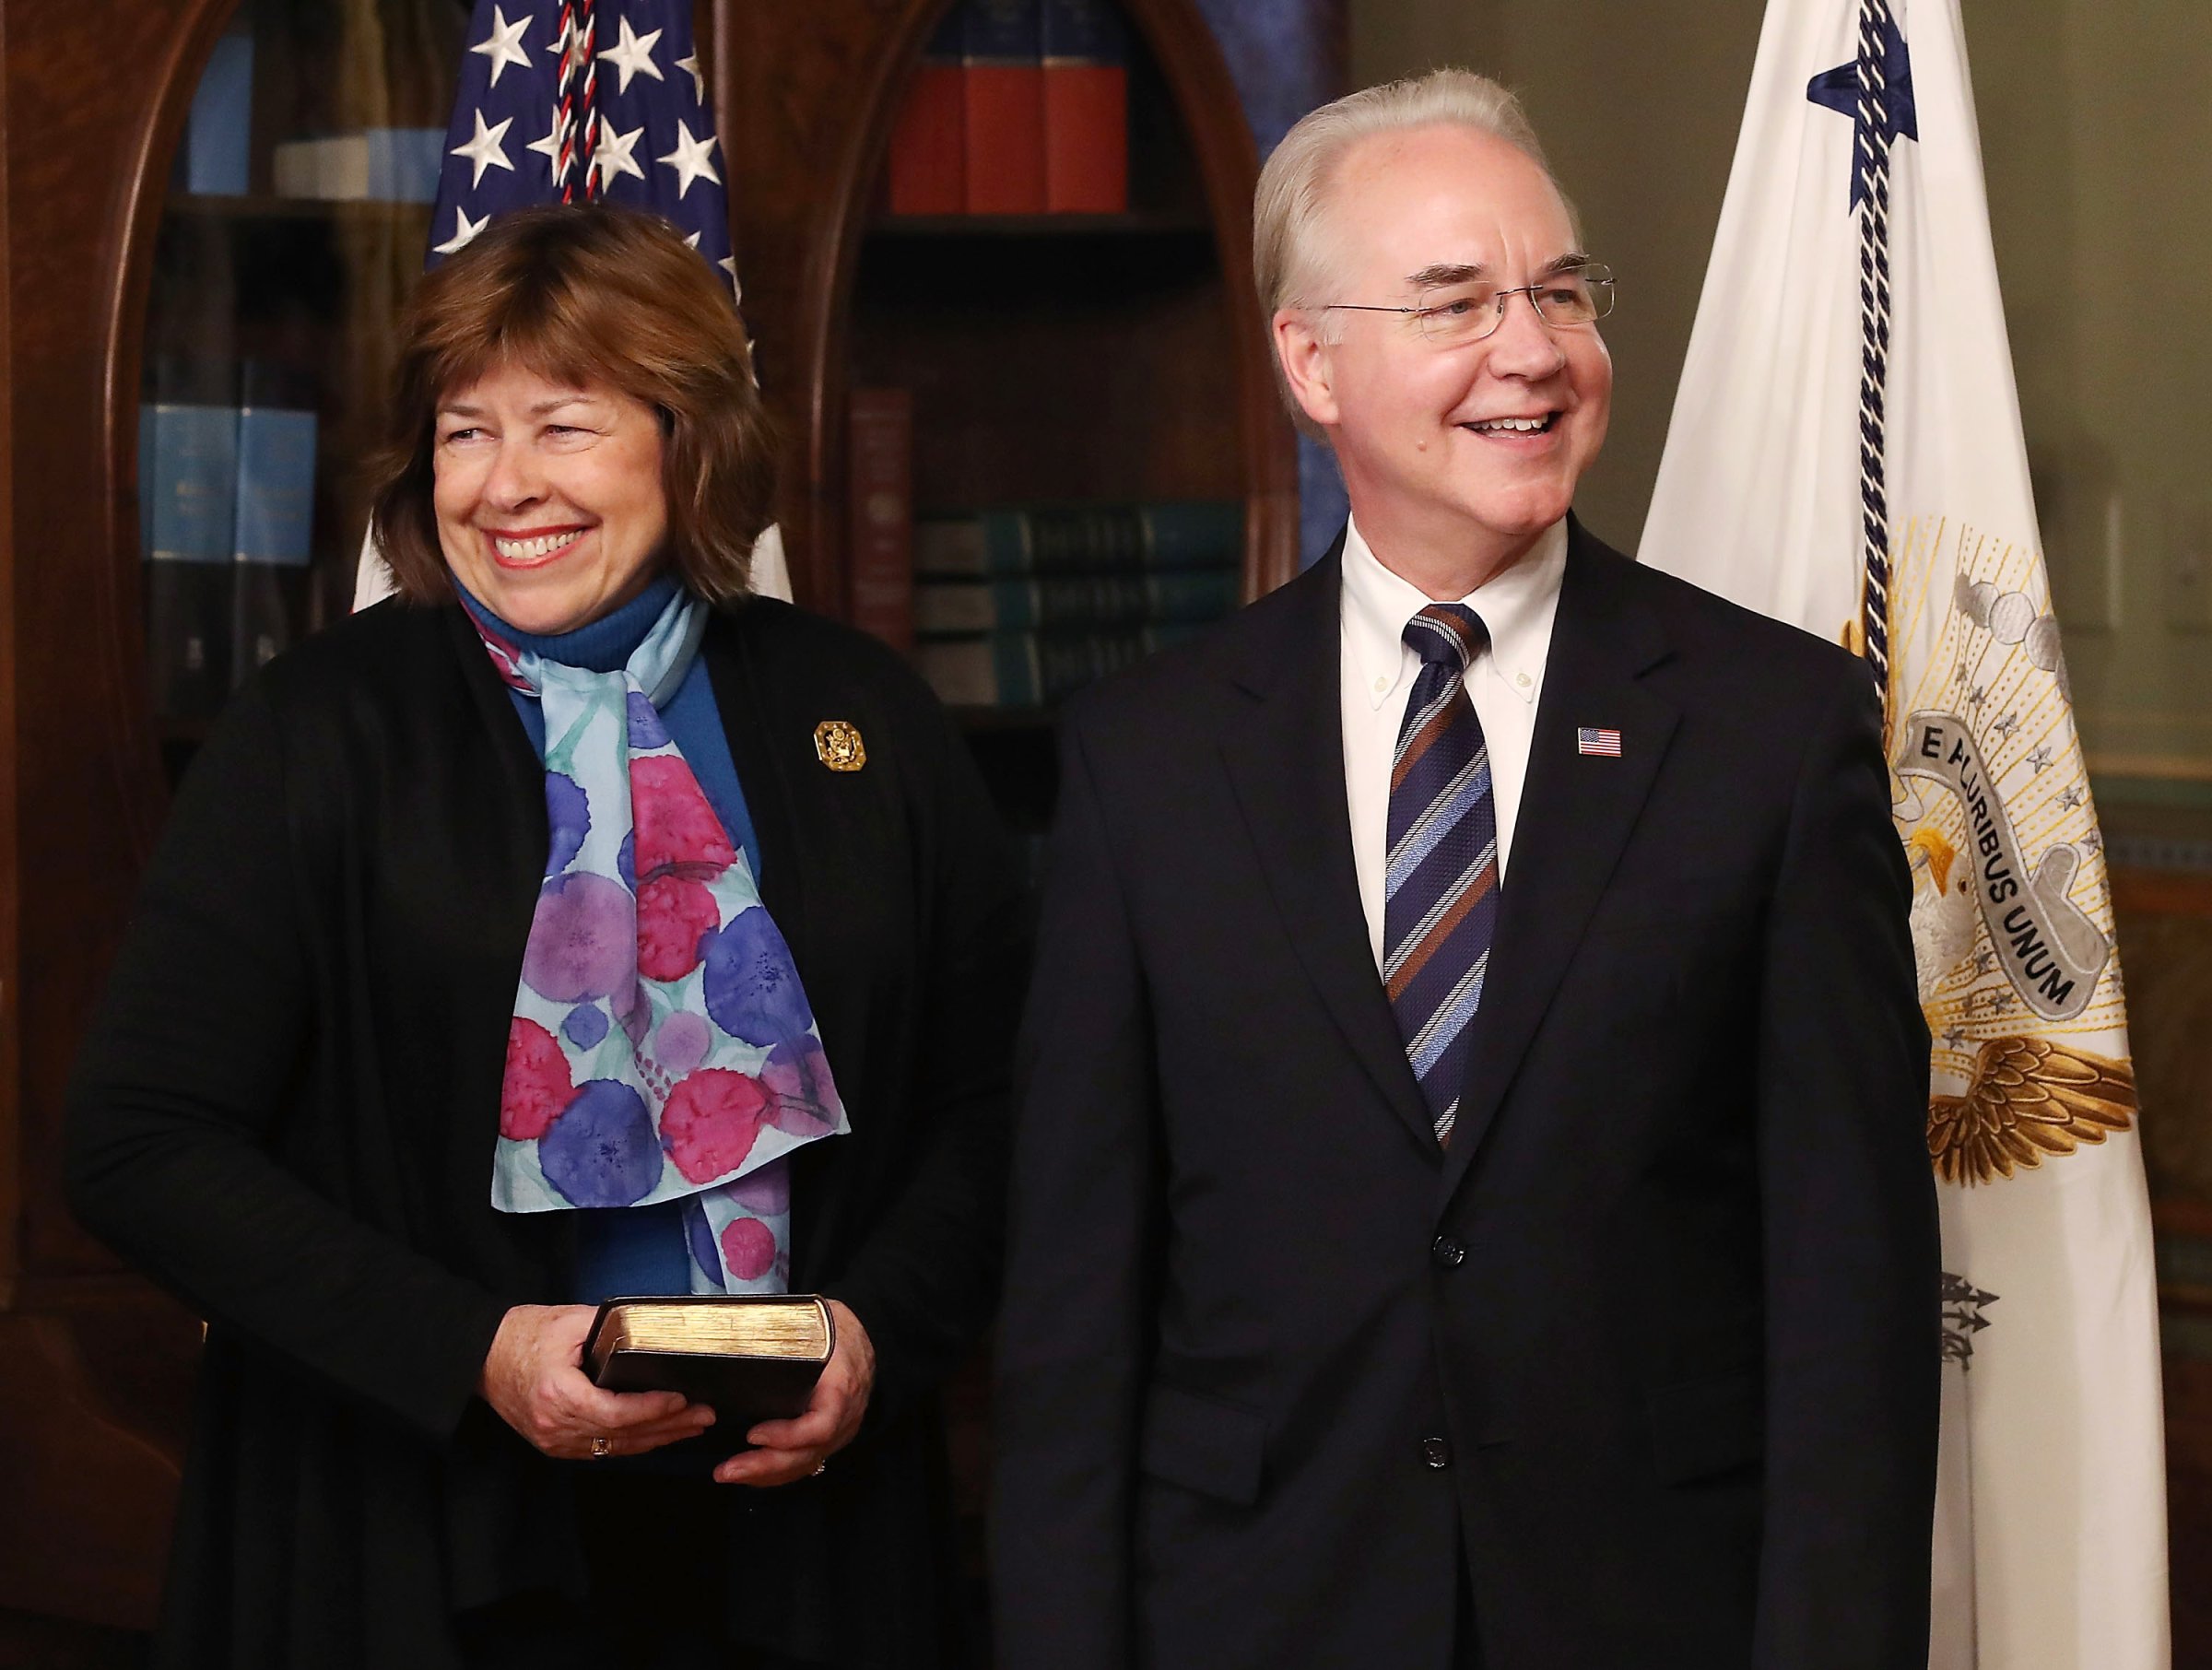 Tom Price Sworn In As Secretary Of Health And Human Services Department